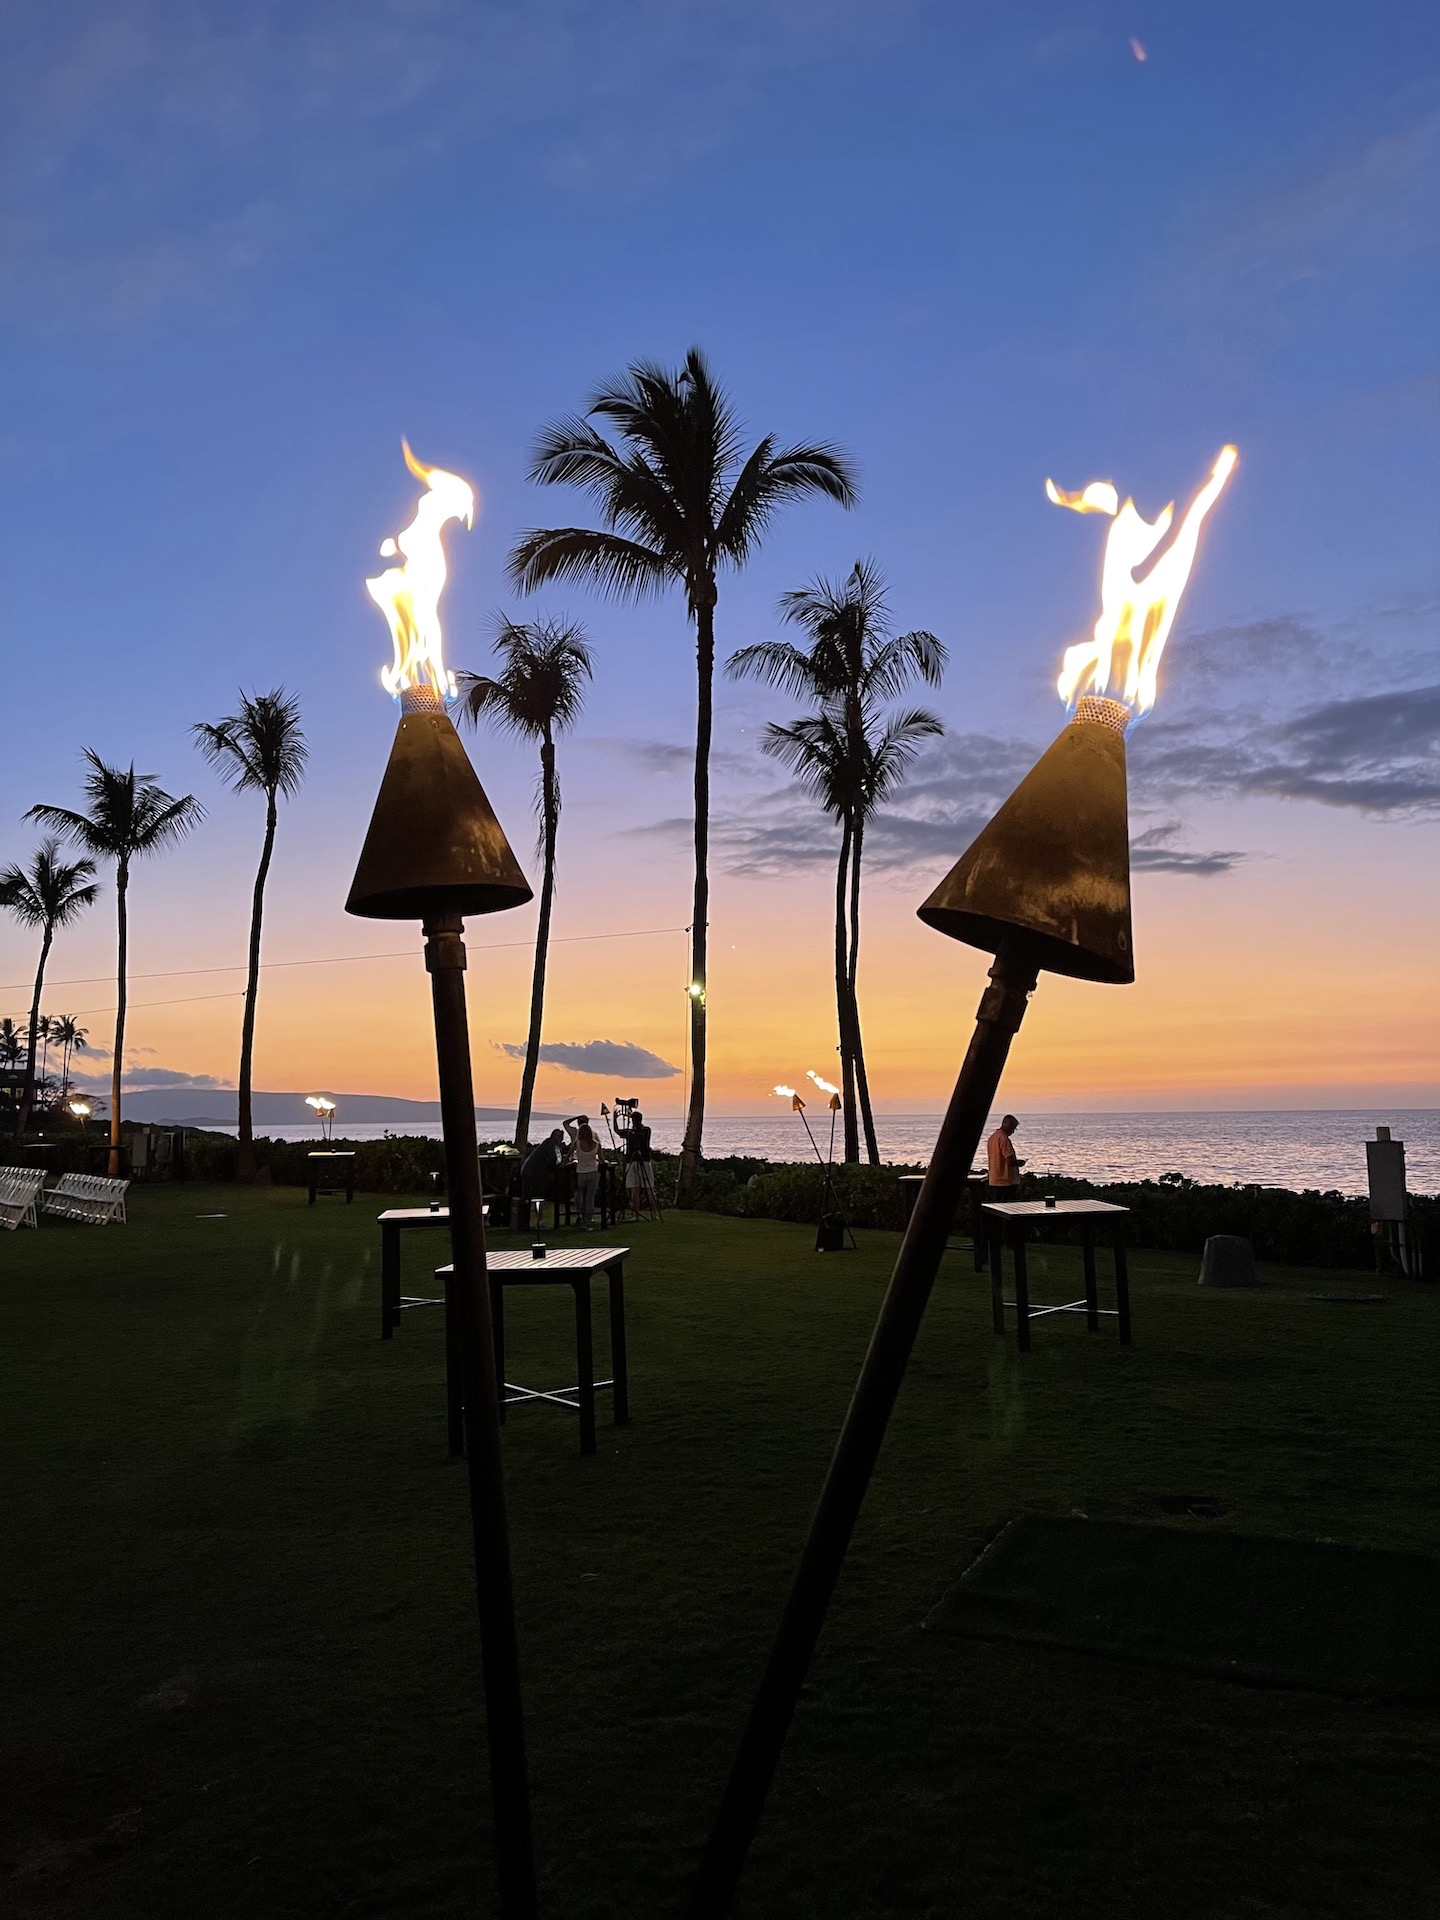 Tiki Torches at sunset on the Molokini Garden Lawn for the 2023 Maui Songwriter's Festival.